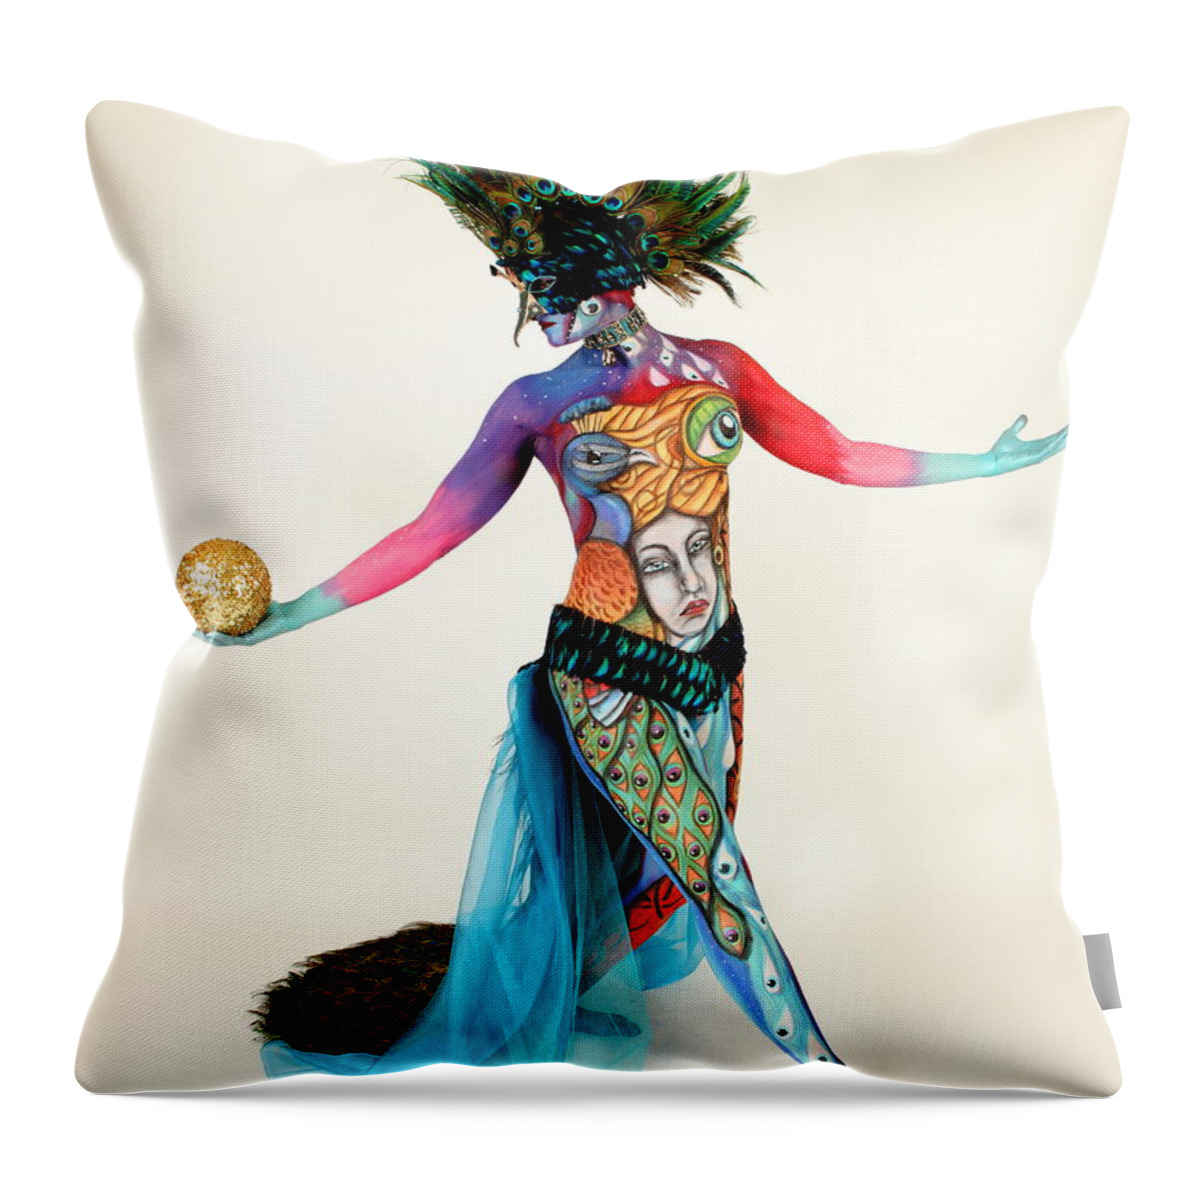 Bodypaint Throw Pillow featuring the photograph Letting Go by Angela Rene Roberts and Cully Firmin